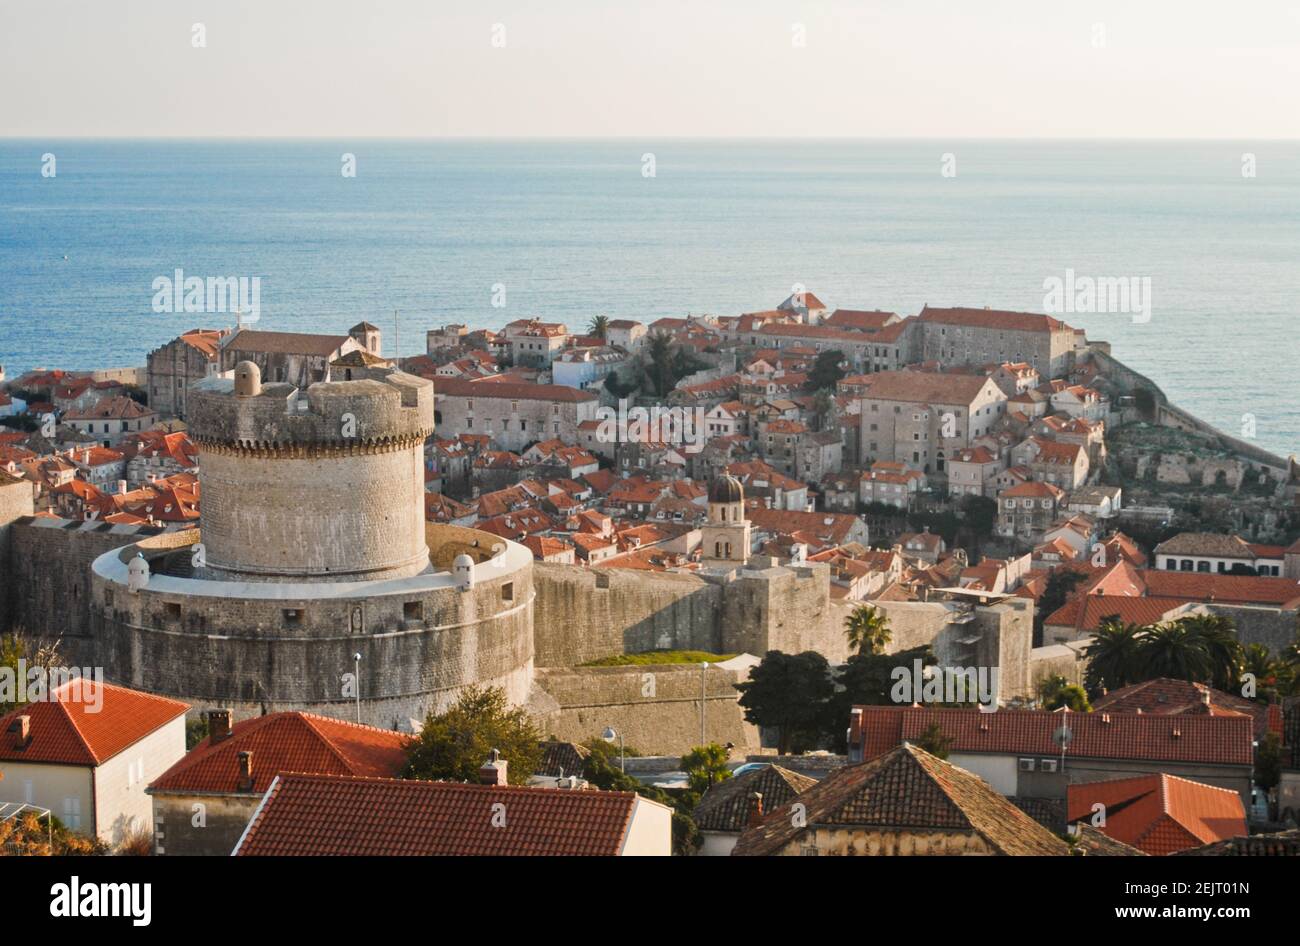 Dubrovnik Old Town, fortress and walls, Croatia. Panoramic view from above Stock Photo